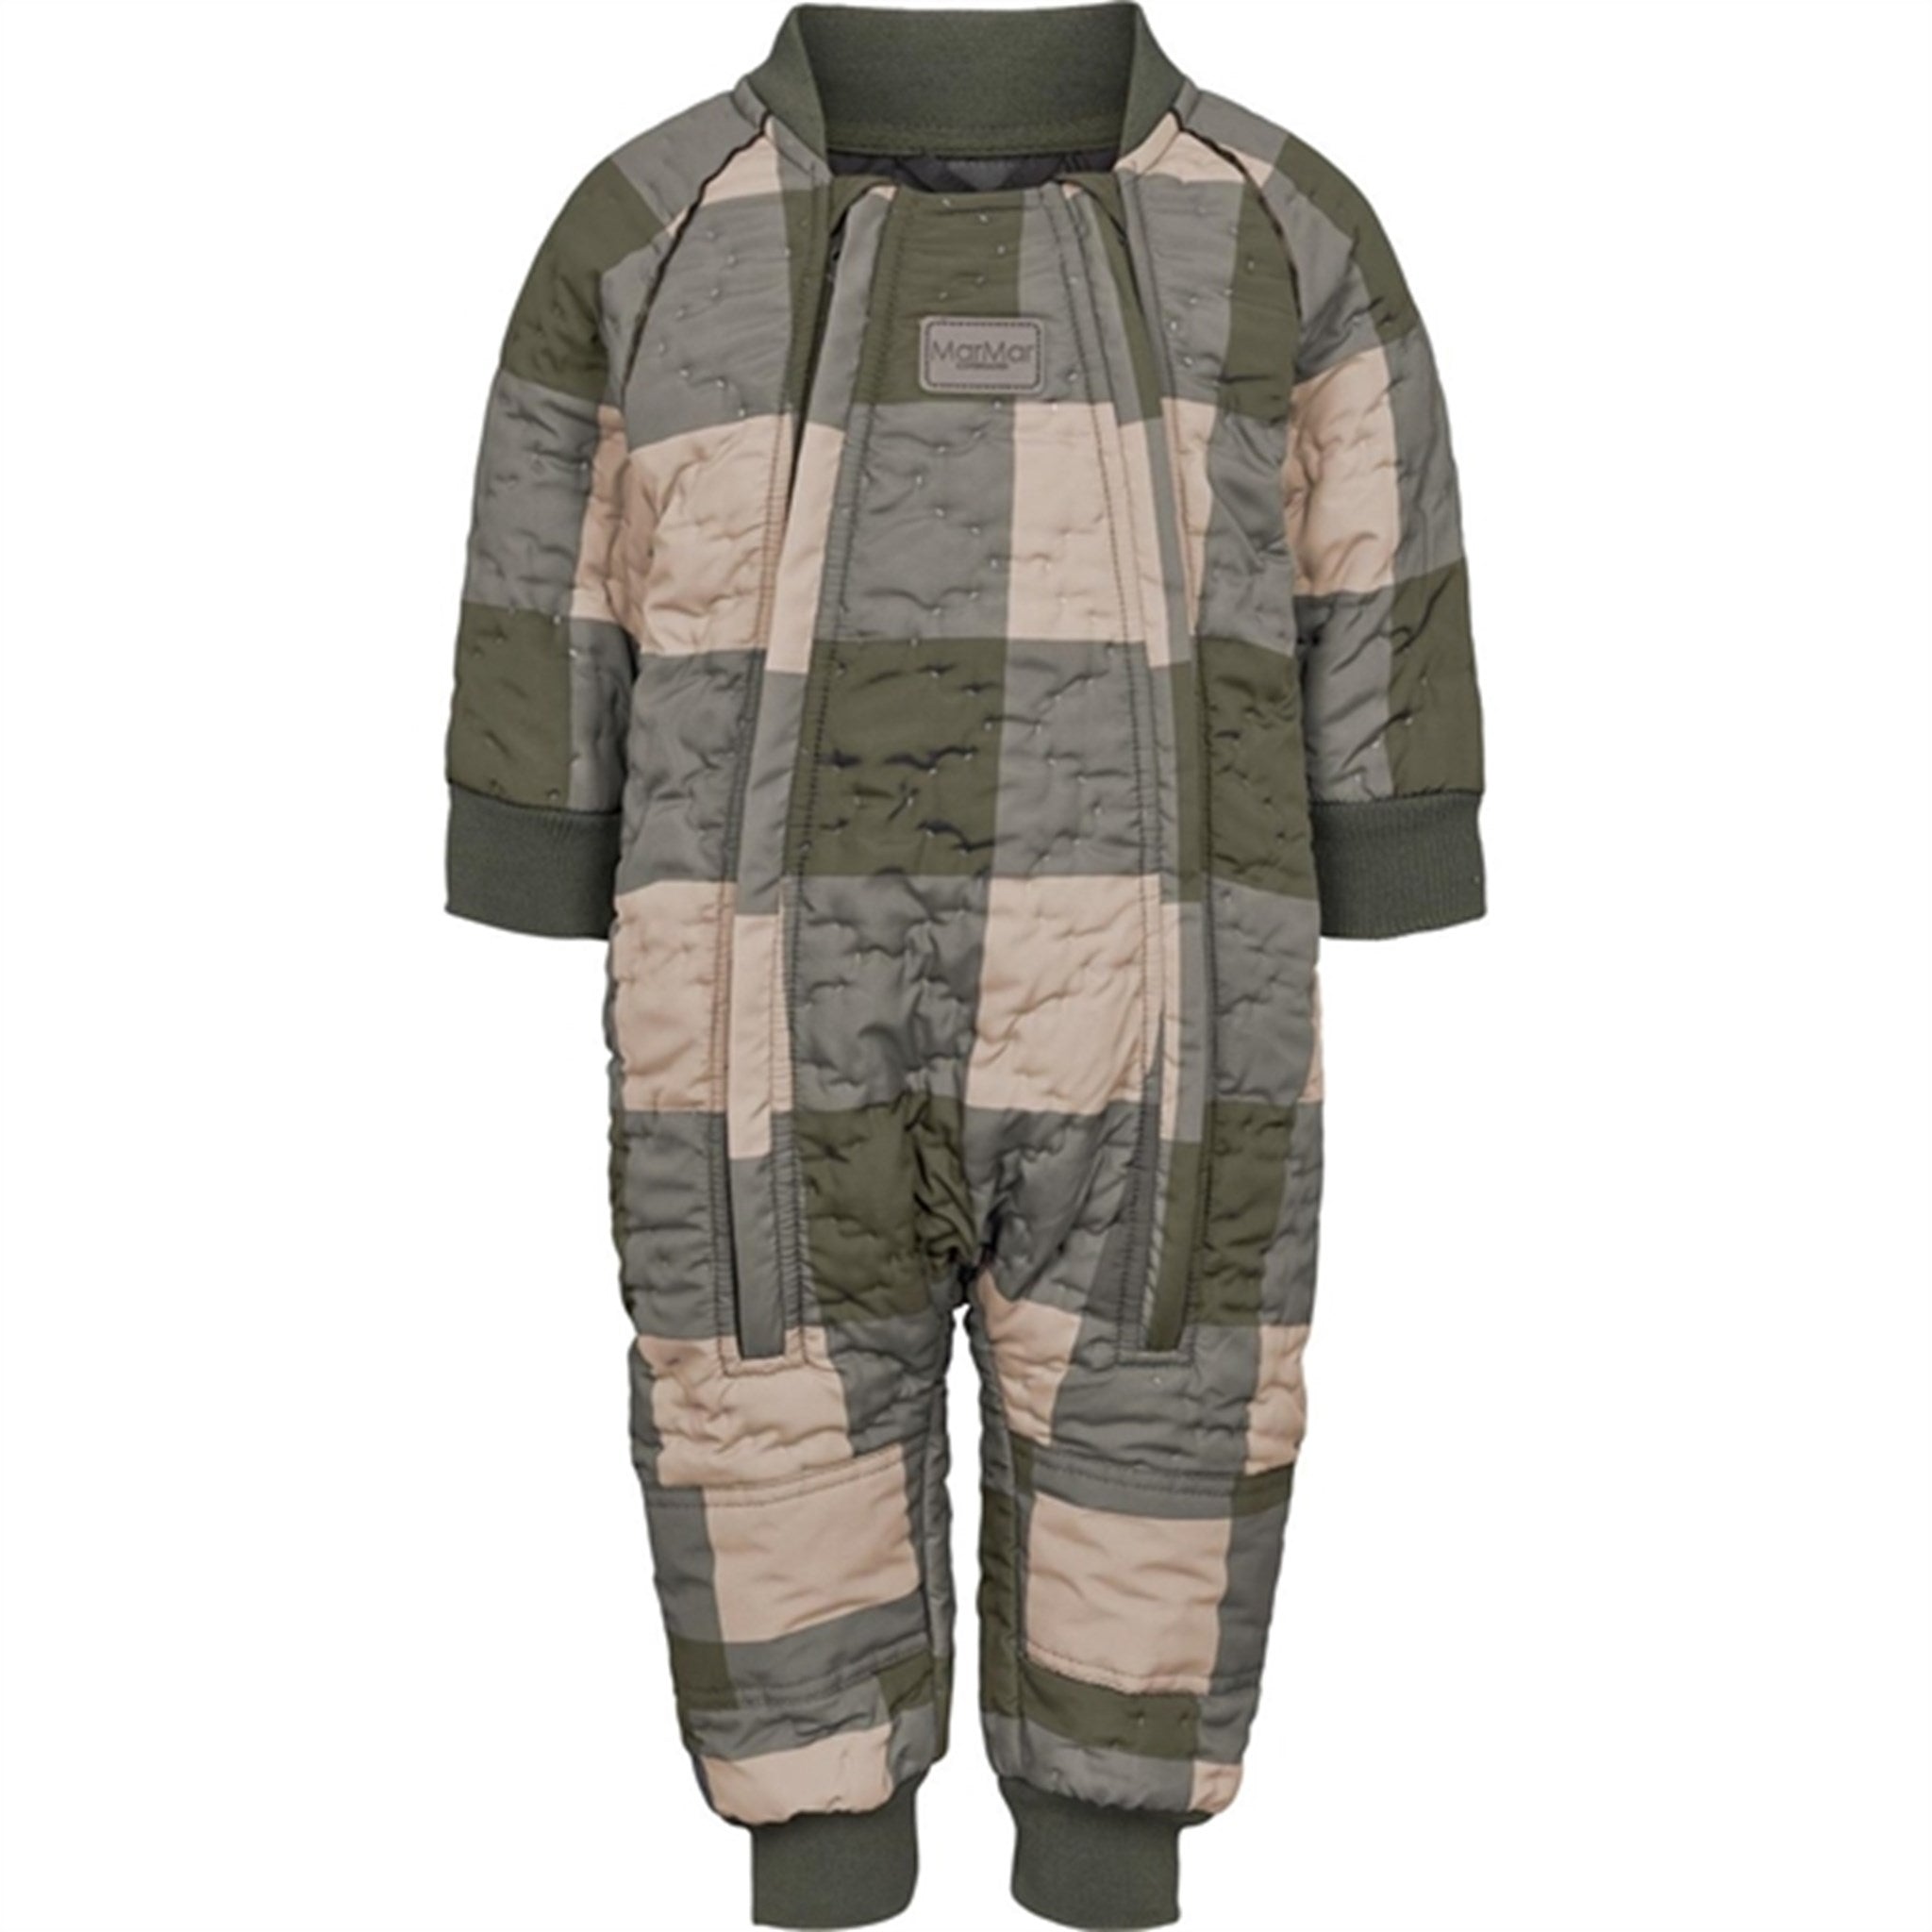 MarMar Summer Check Oza Thermo Suit